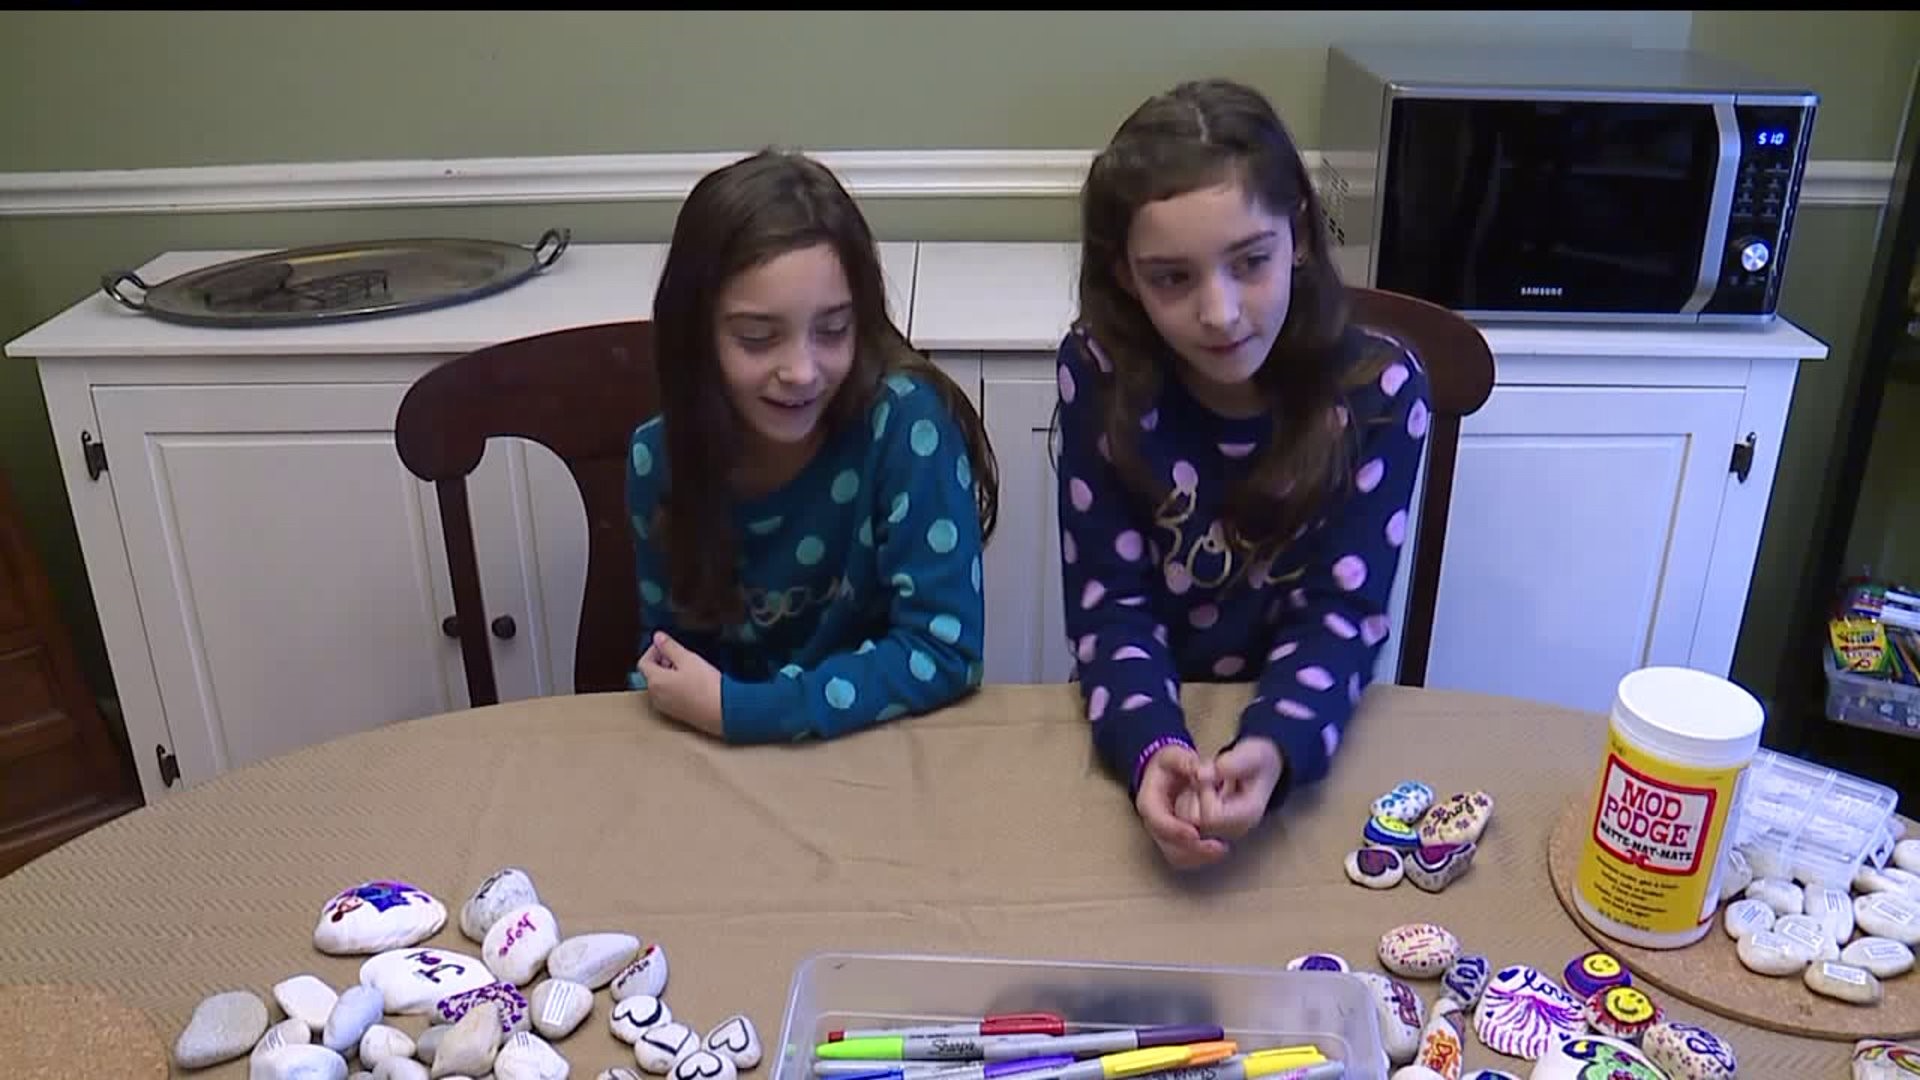 York County girls on a mission to spread kindness in a unique way